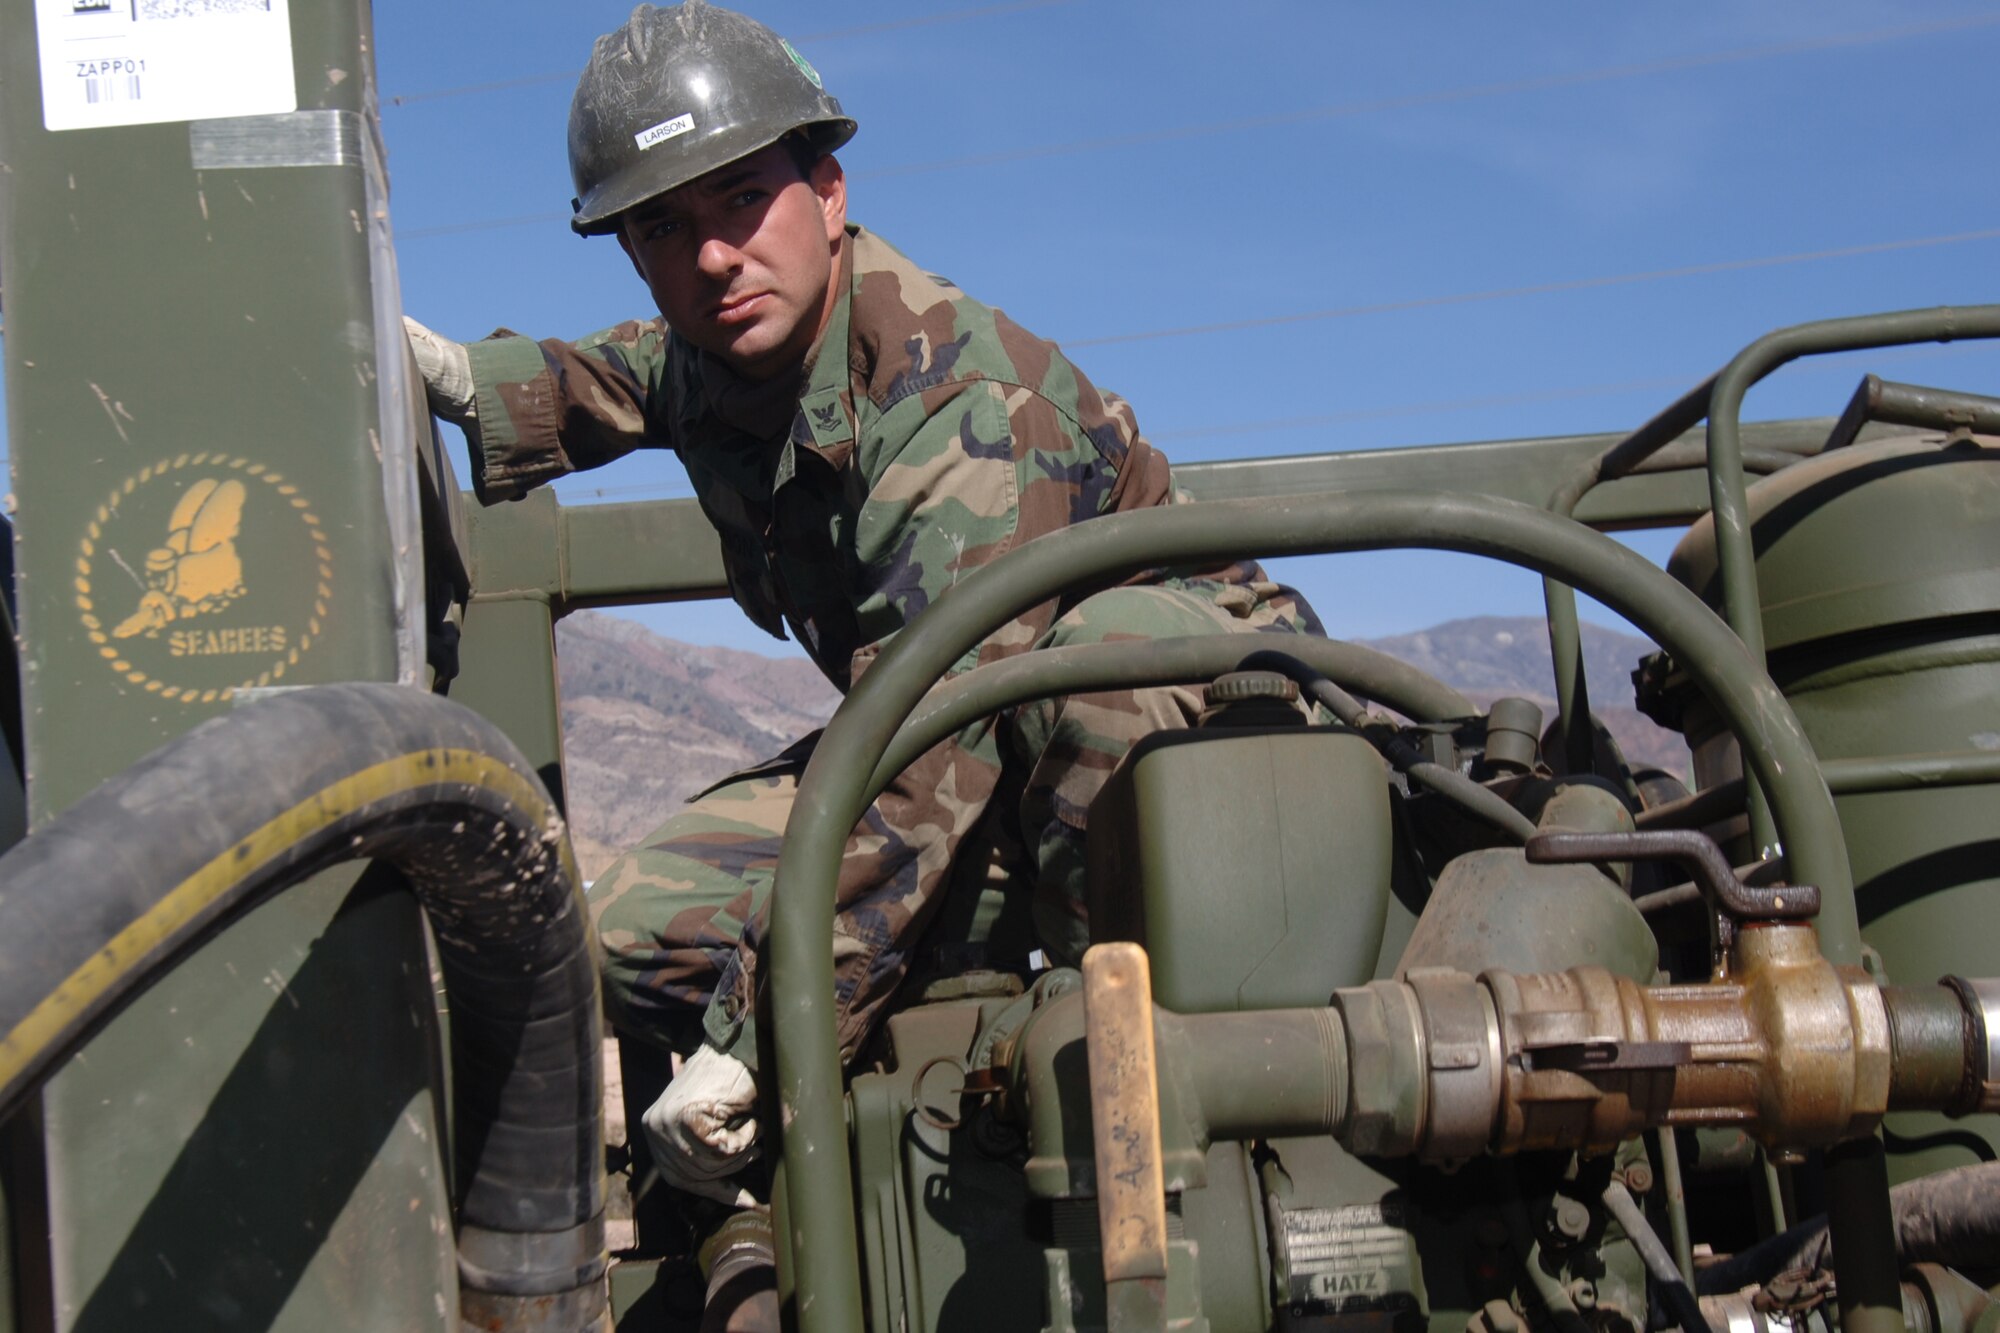 U.S. Navy Petty Officer 2nd Class Paul Larson, a lead welder assigned to Task Force New Horizons, fills a water well rig with fuel, June 19, in Huanta, Peru, where U.S. Navy Seabeas are constructing a water well in support of New Horizons Peru 2008, a U.S. and Peruvian humanitarian mission set on providing relief to underprivileged Peruvian. (U.S. Air Force photo/Tech. Sgt. Kerry Jackson)